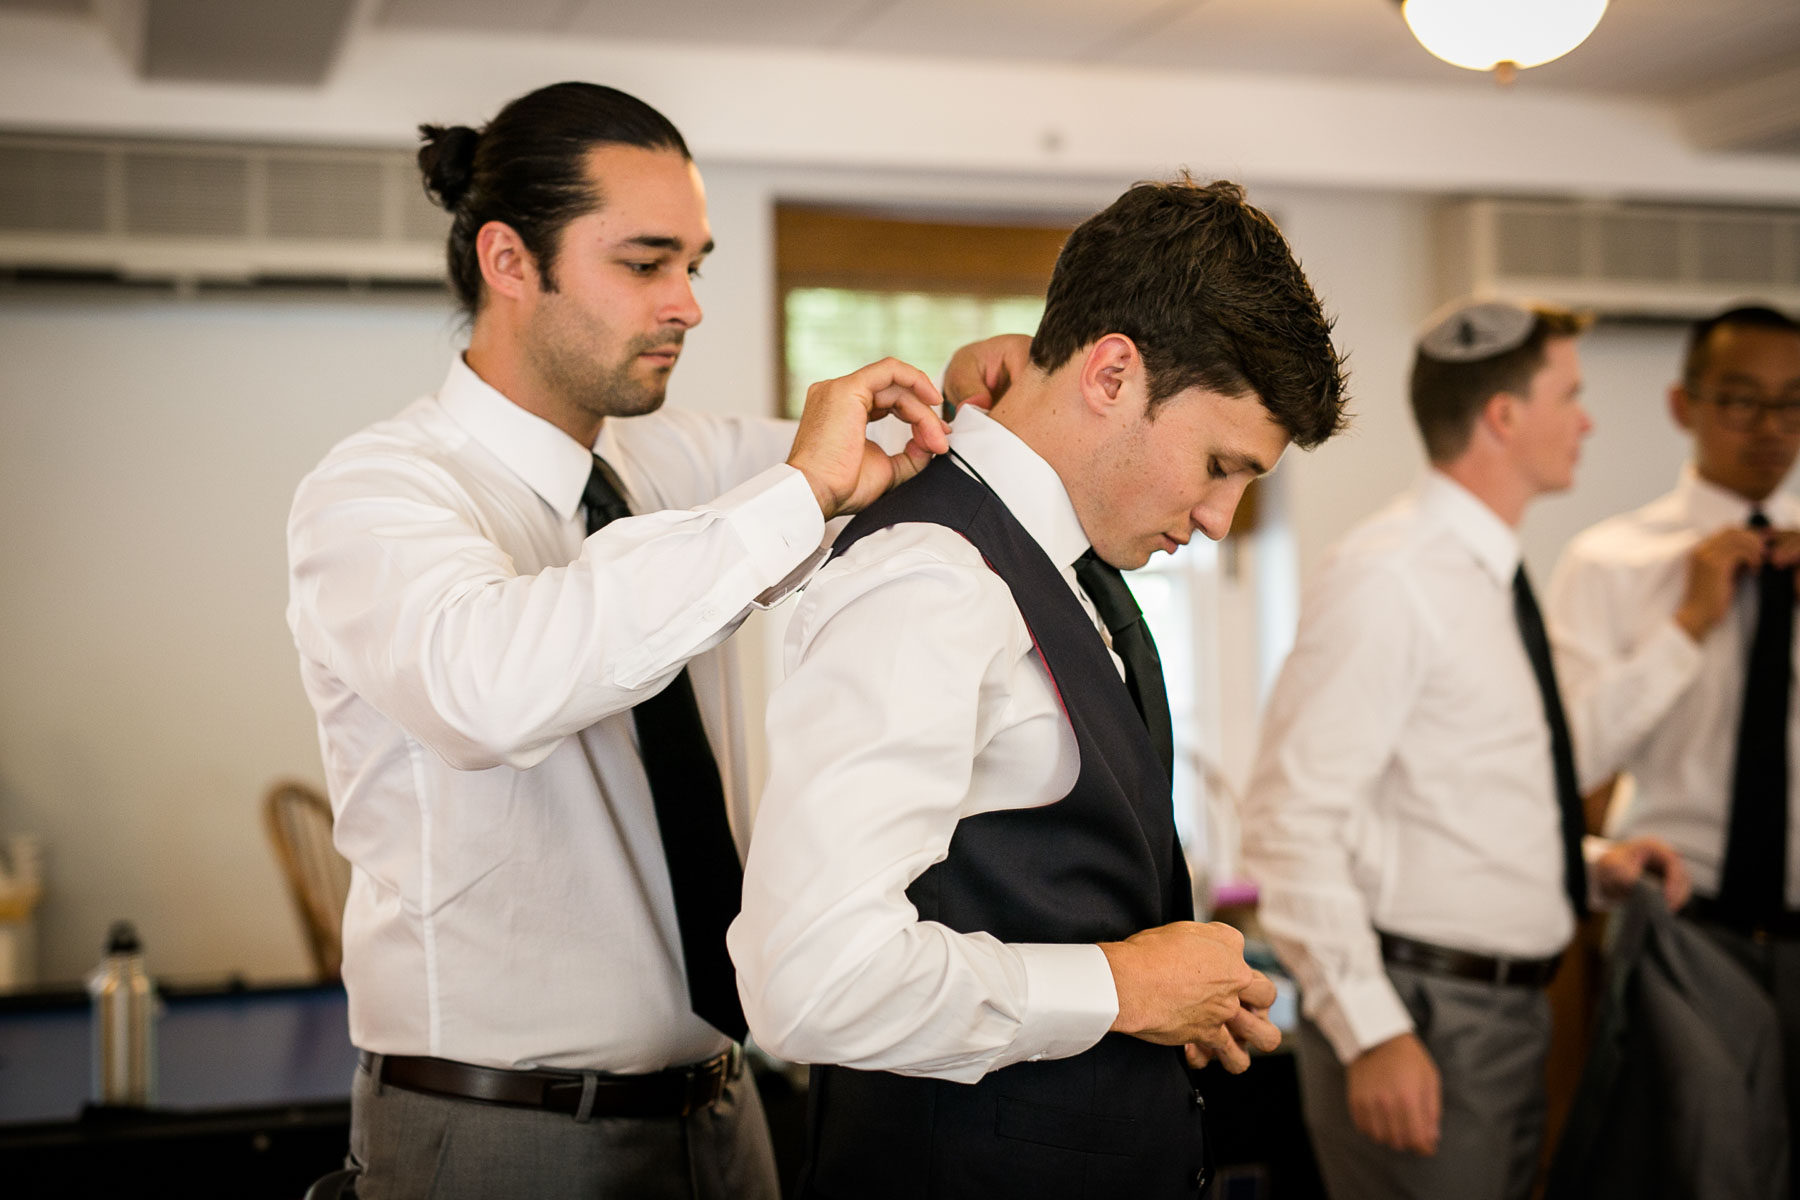 The_Connors_Center_Wedding_Dan_Aguirre_Photography_024